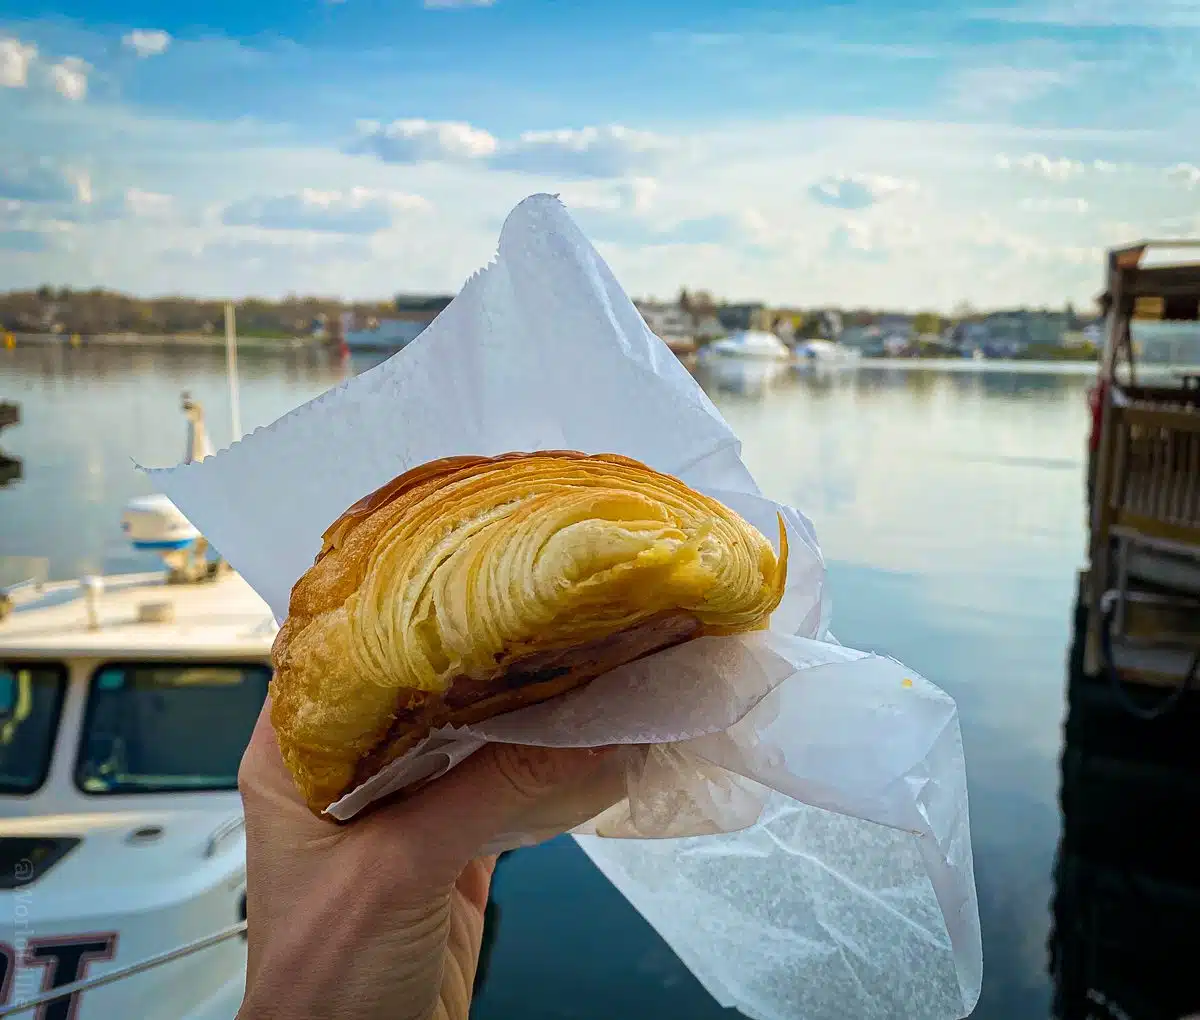 Eating a croissant from Elephantine at the Portsmouth, NH harbor.